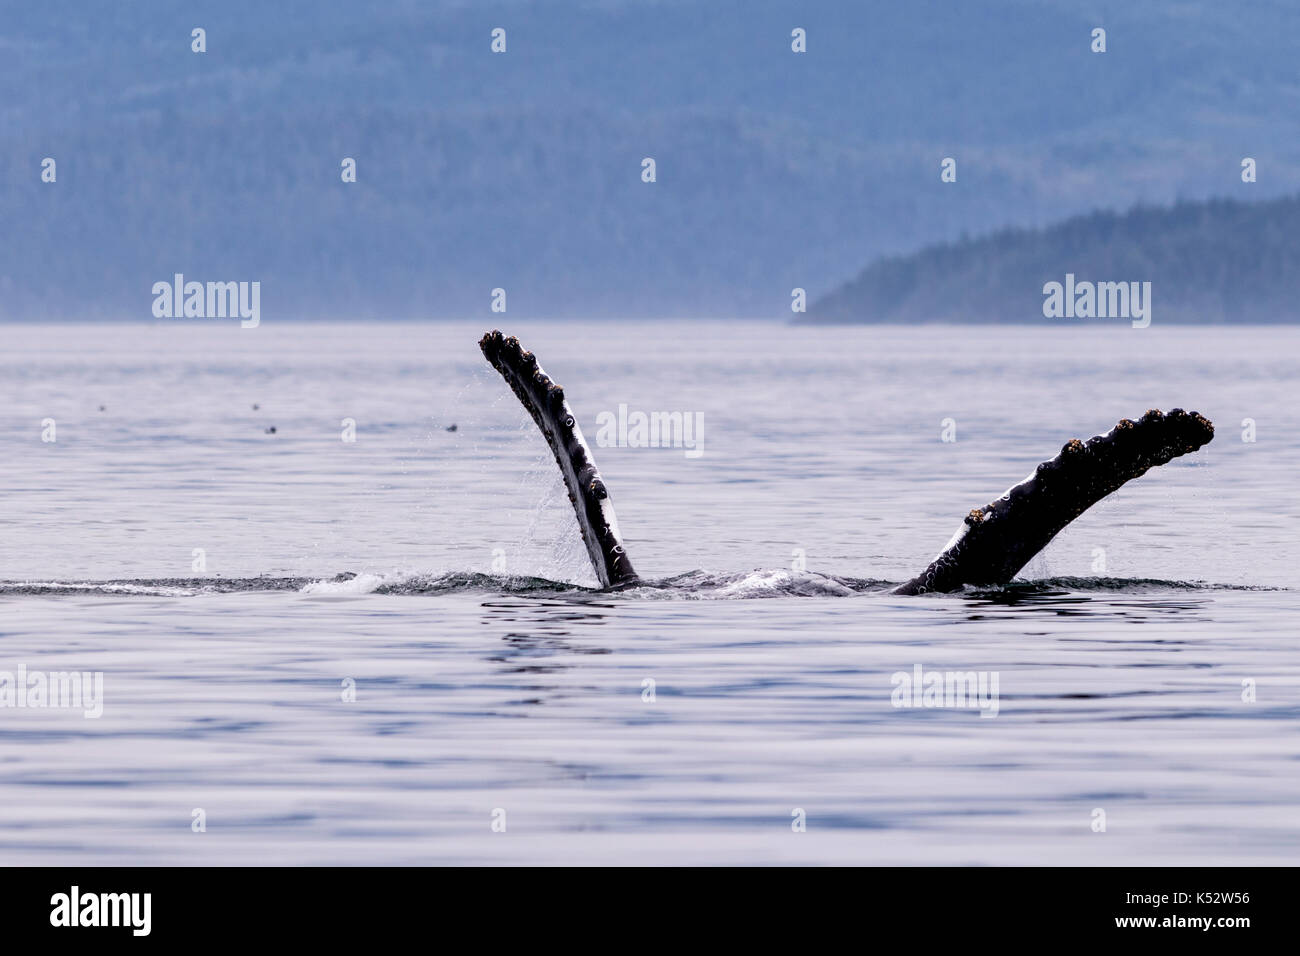 Humpback whale on back waving with its flippers, Broughton Archipelago Provincial Marine Park off Vancouver Island, British Columbia, Canada. Stock Photo